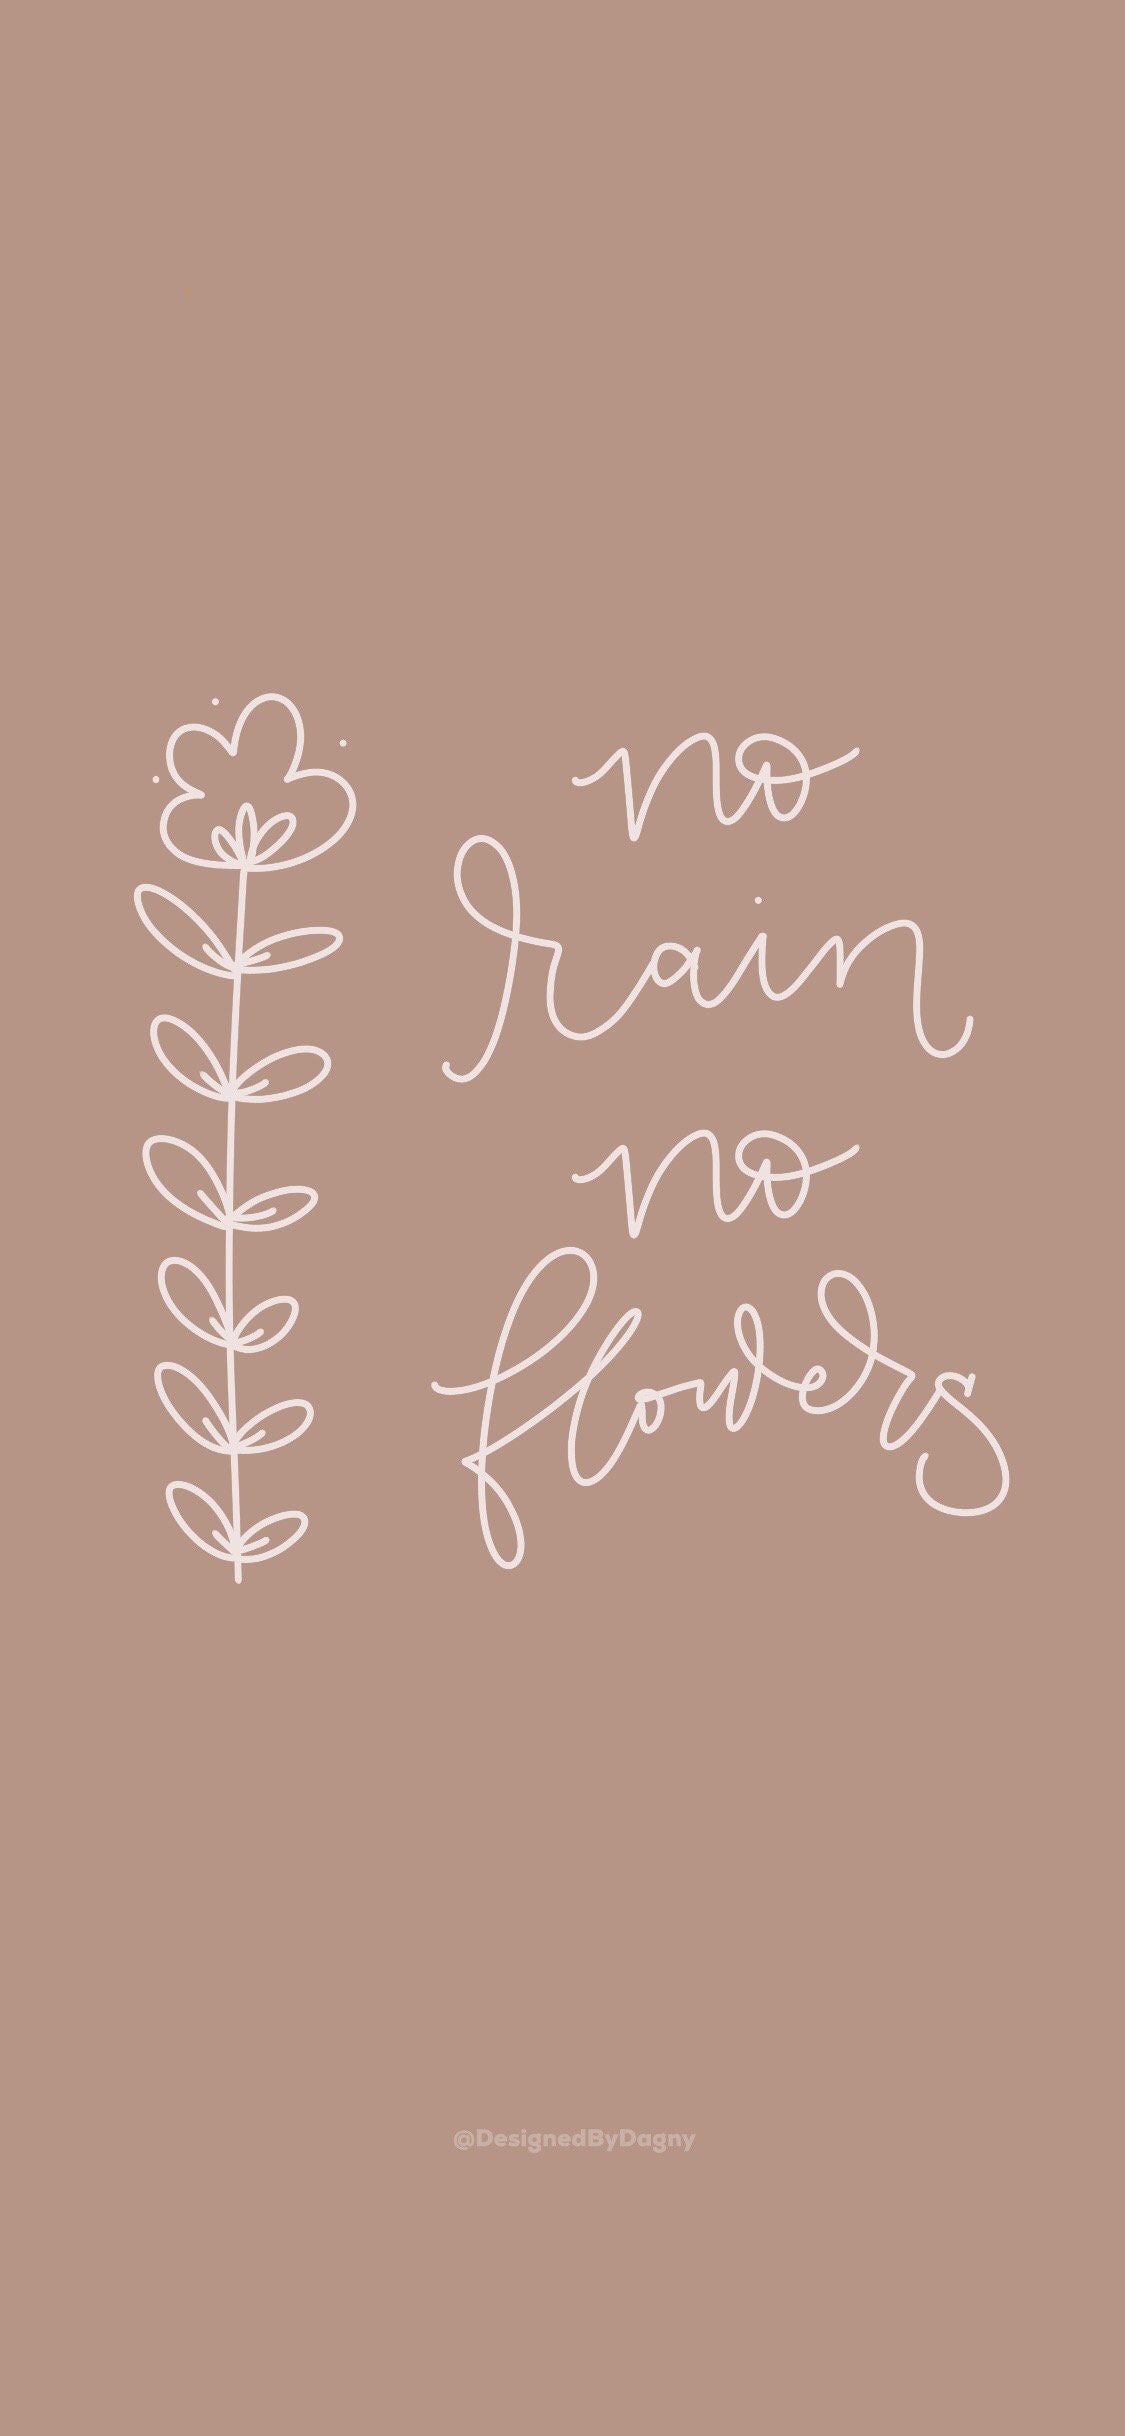 No Rain No Flowers Inspirational Iphone Wallpaper Cell Phone | Etsy